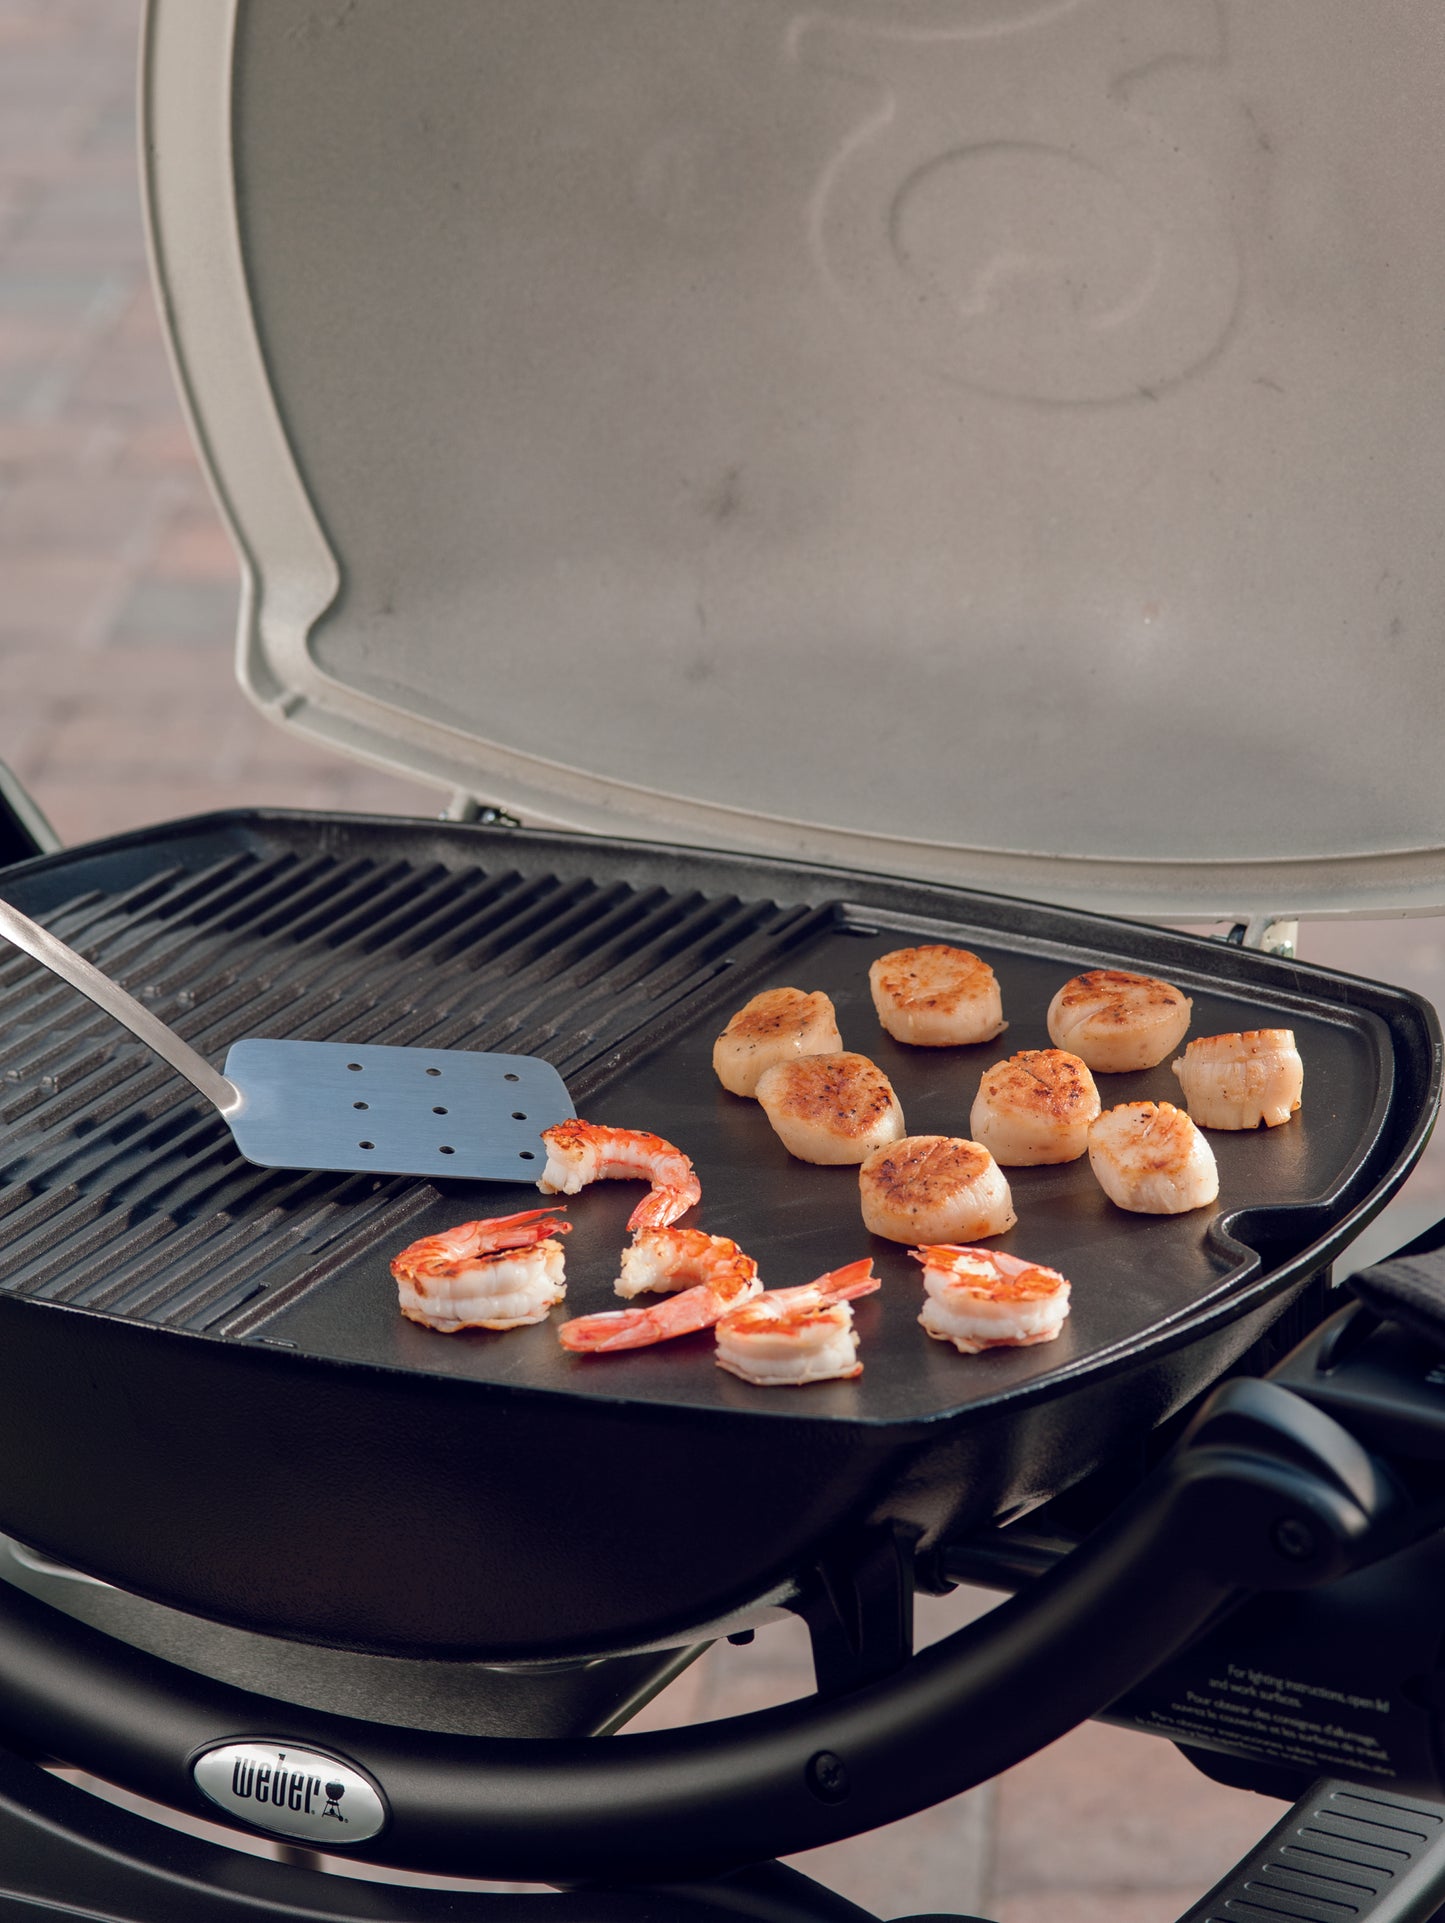 Weber 6559 Cast Iron Griddle | Available in-store and online with Barbecues Galore. 3 Locations in the GTA: Burlington, Oakville & Etobicoke, Ontario. 2 Locations in Calgary, Alberta. We have all of your Bbq, patio, parts and accessory needs!